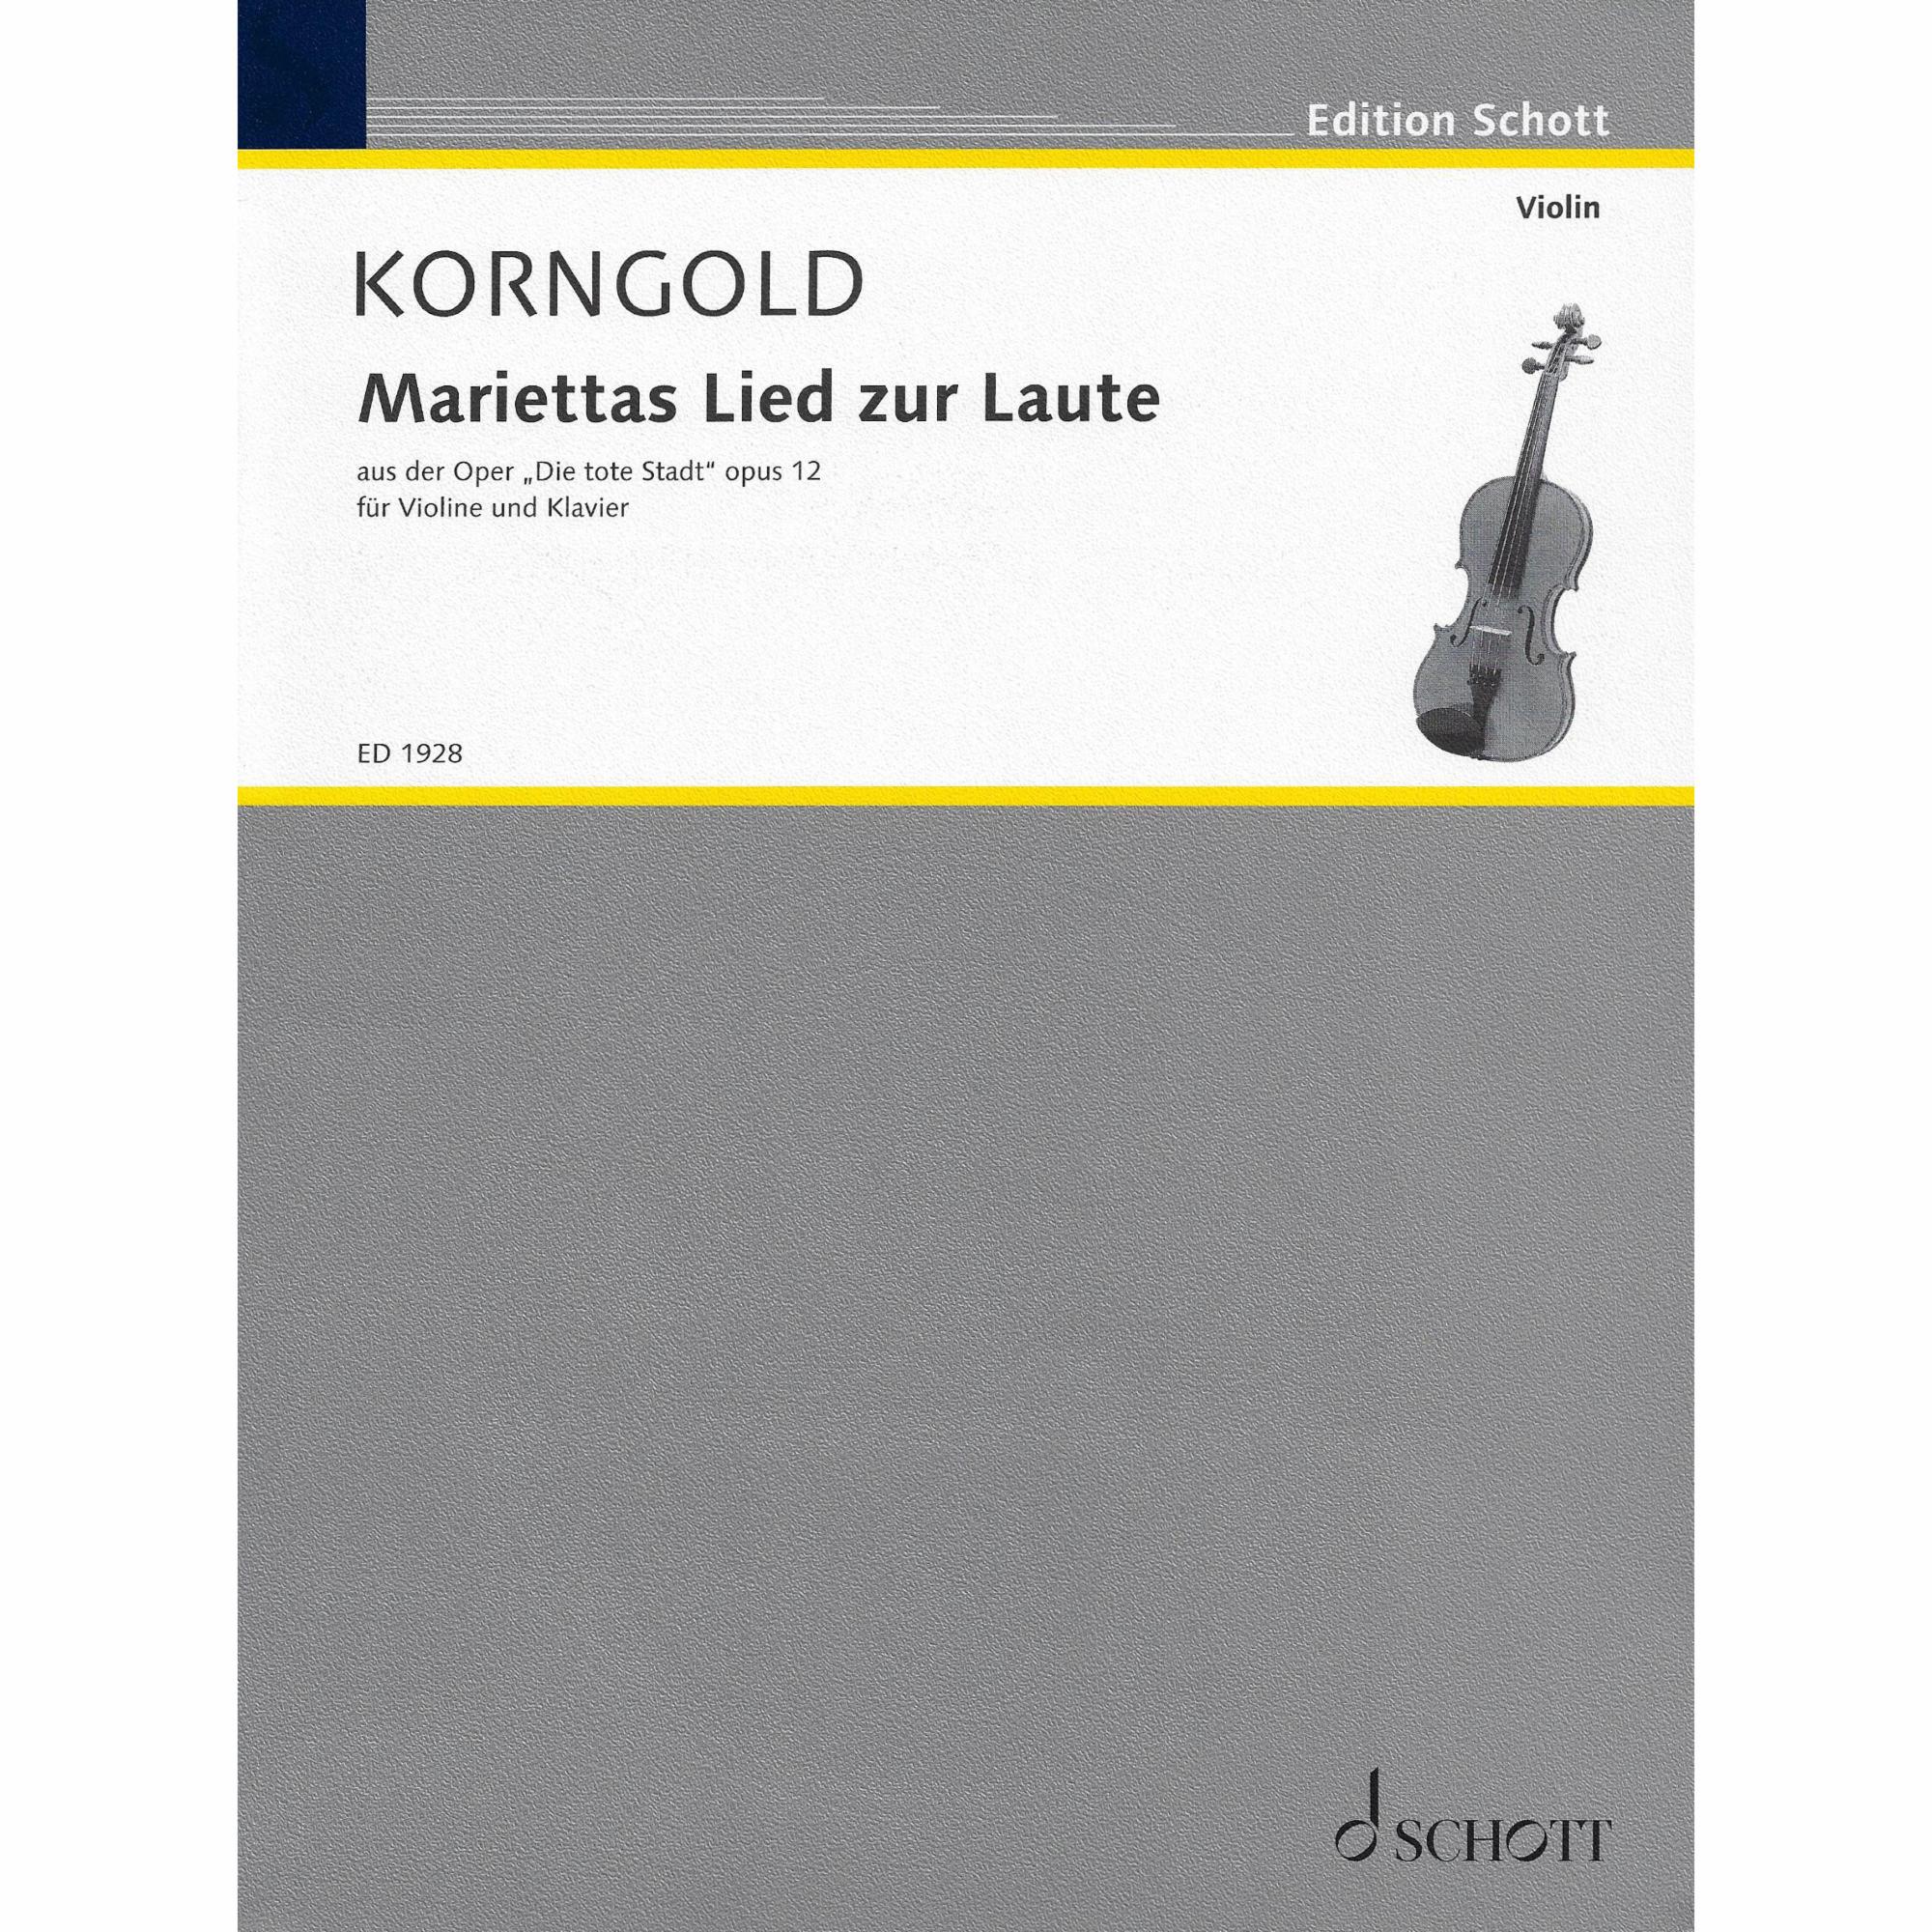 Korngold -- Mariettas Lied zur Laute, from Die Tote Stadt for Violin and Piano